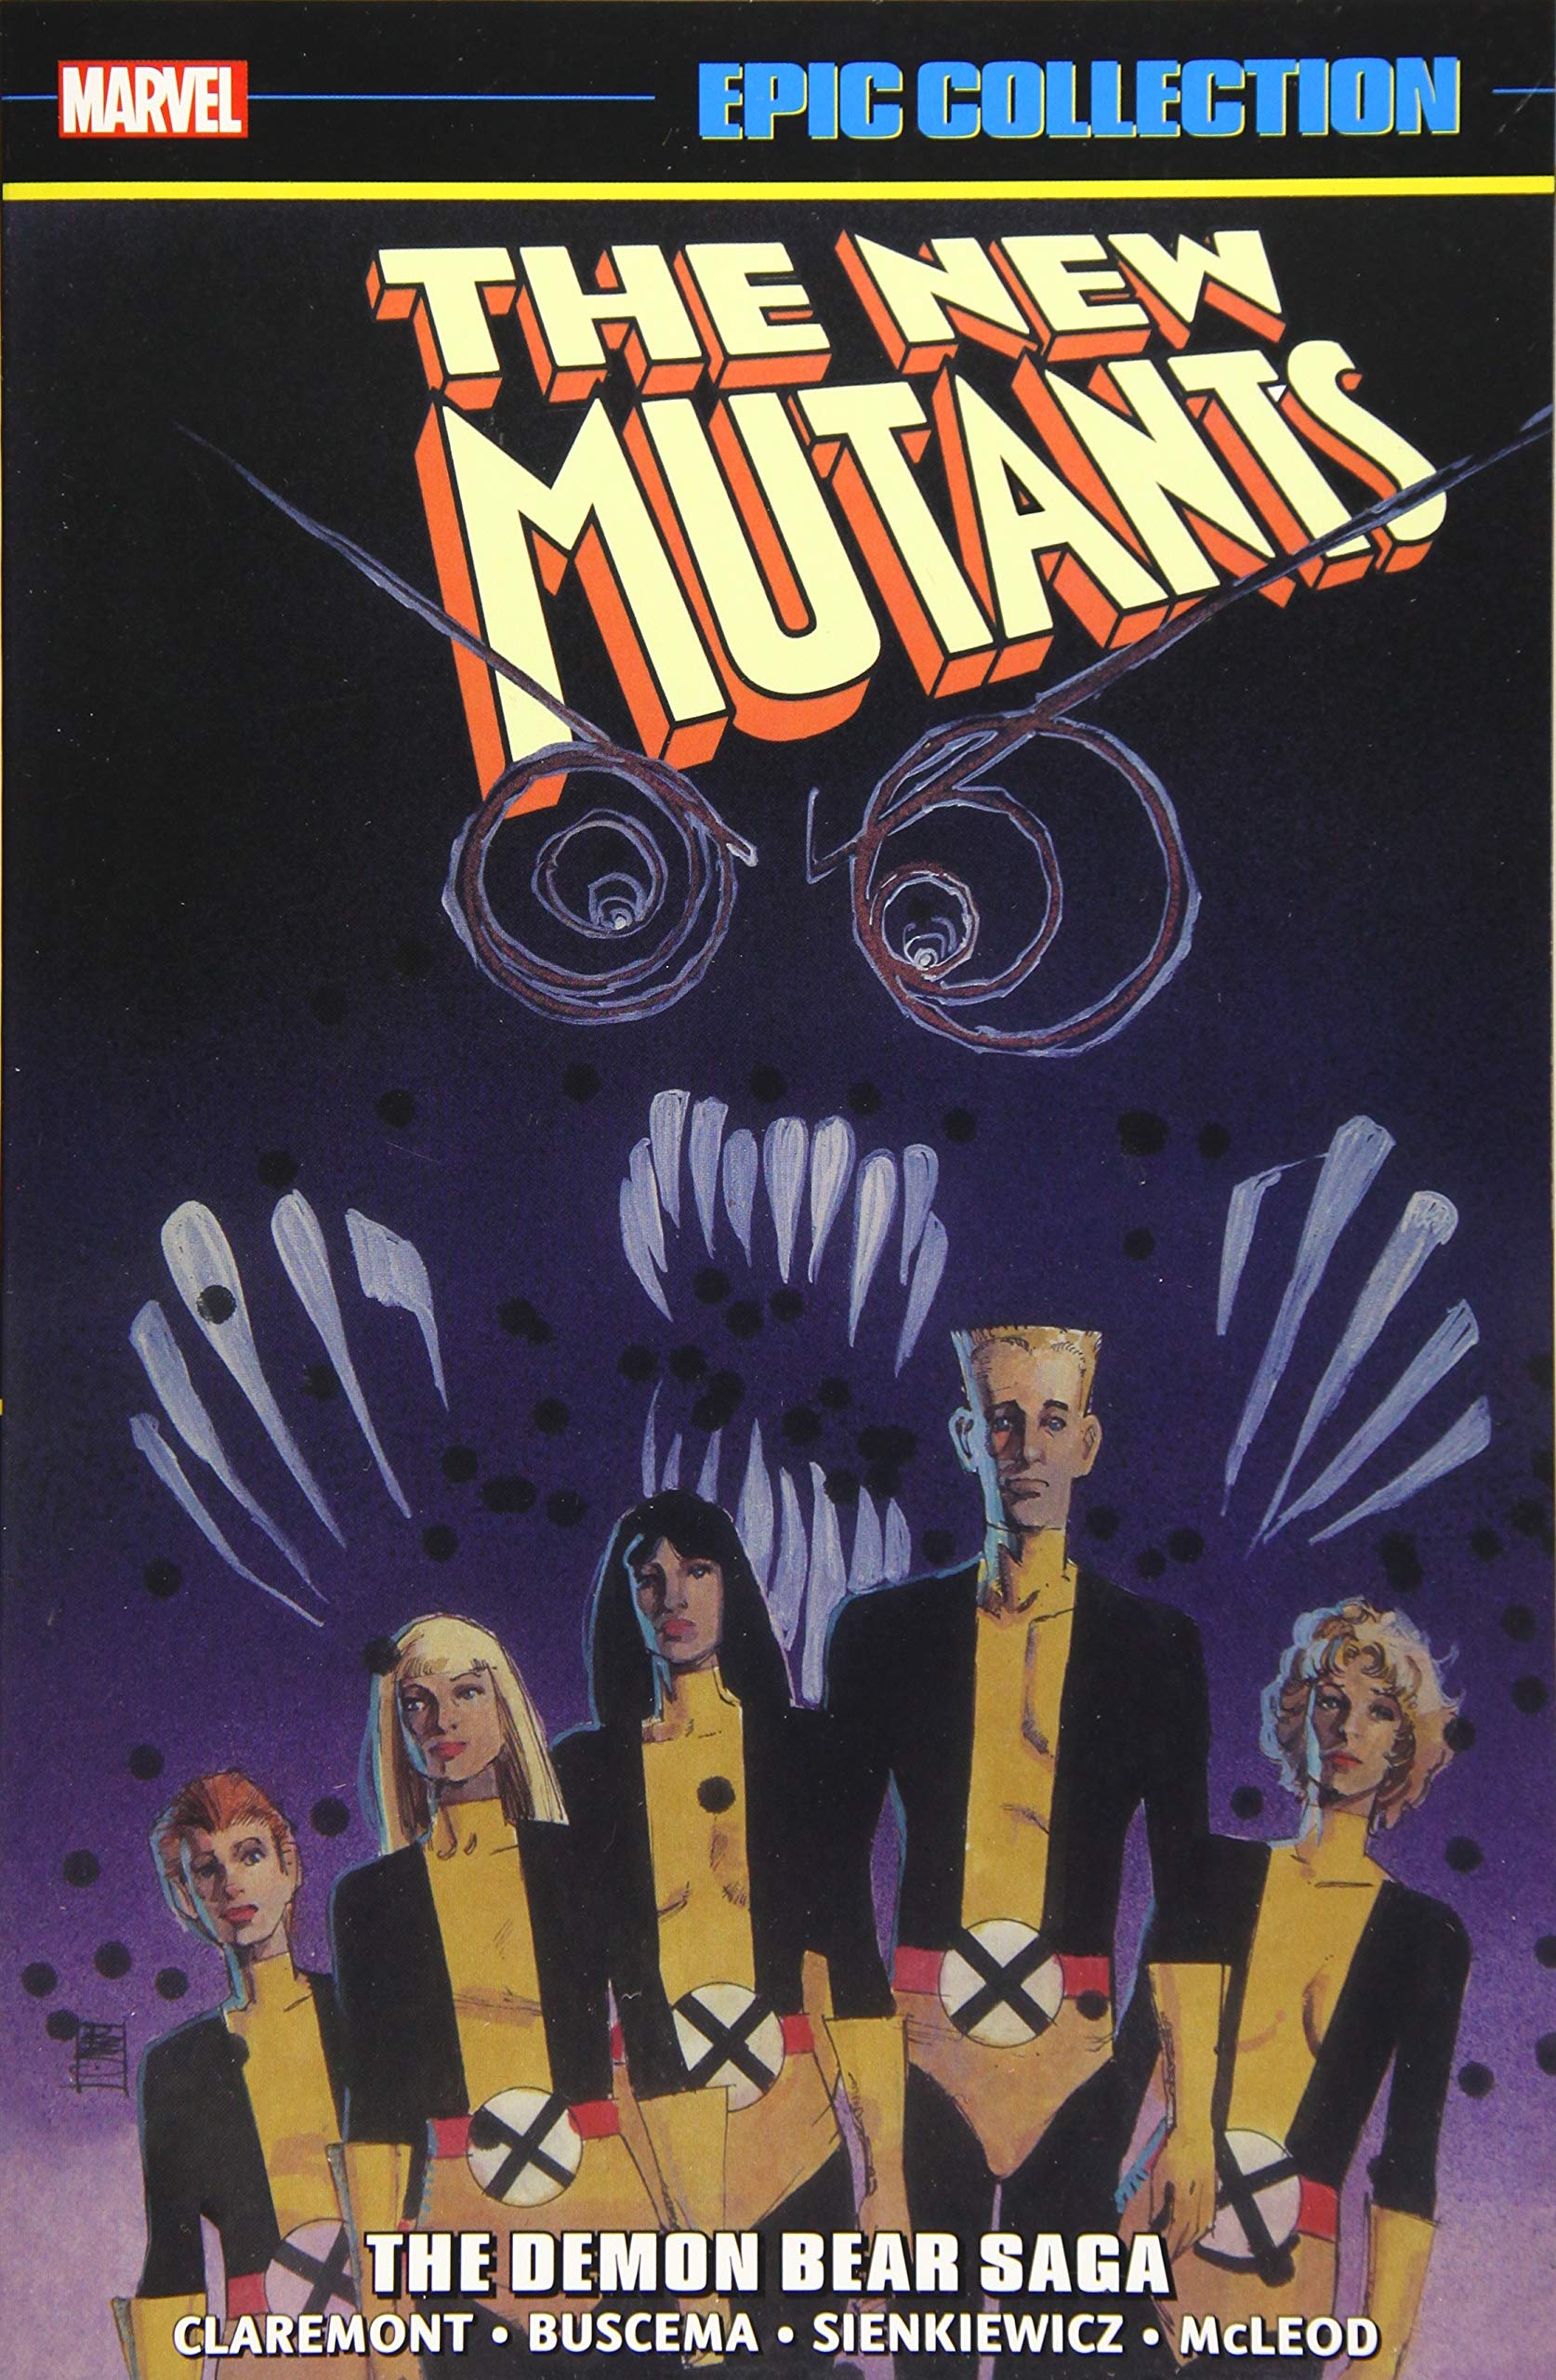 The New Mutants Poster Wallpapers